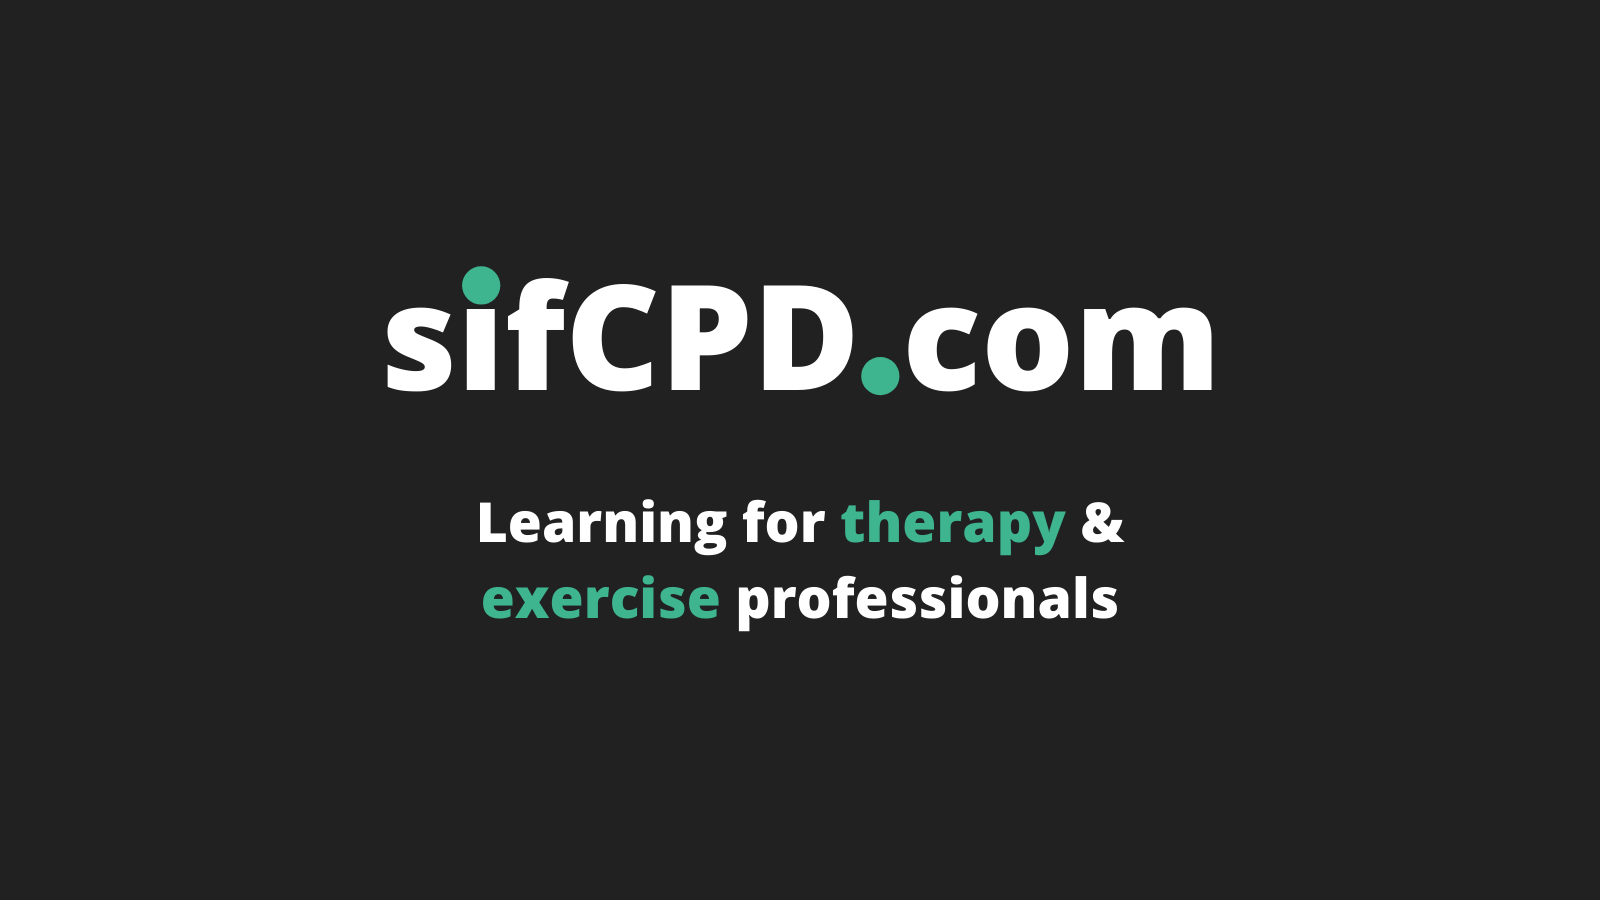 aports-injury-fix-intro-to-sif.health-blog-sifcpd-logo